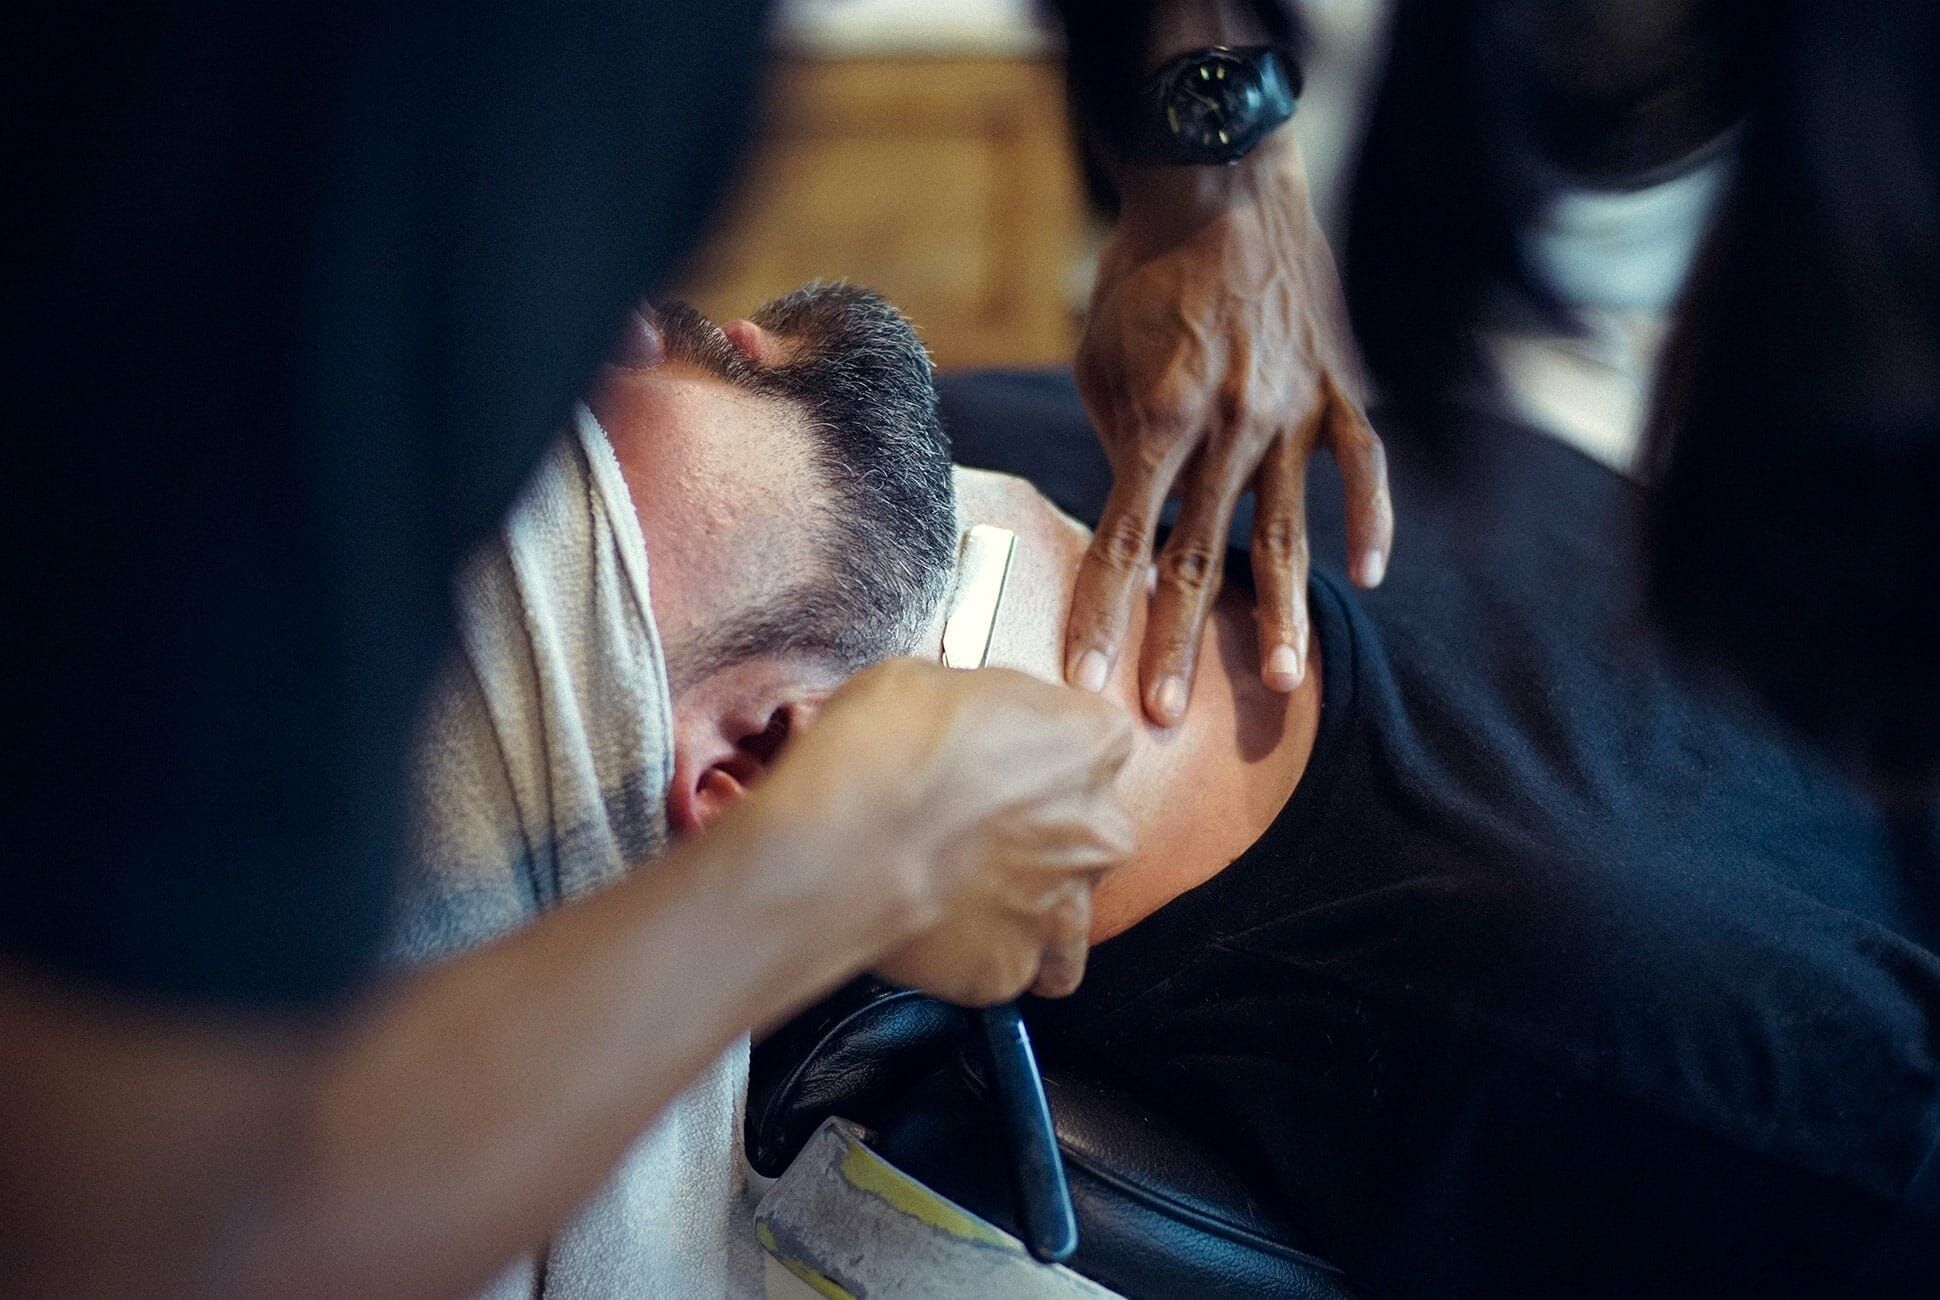 How To Trim Your Beard According To An Expert